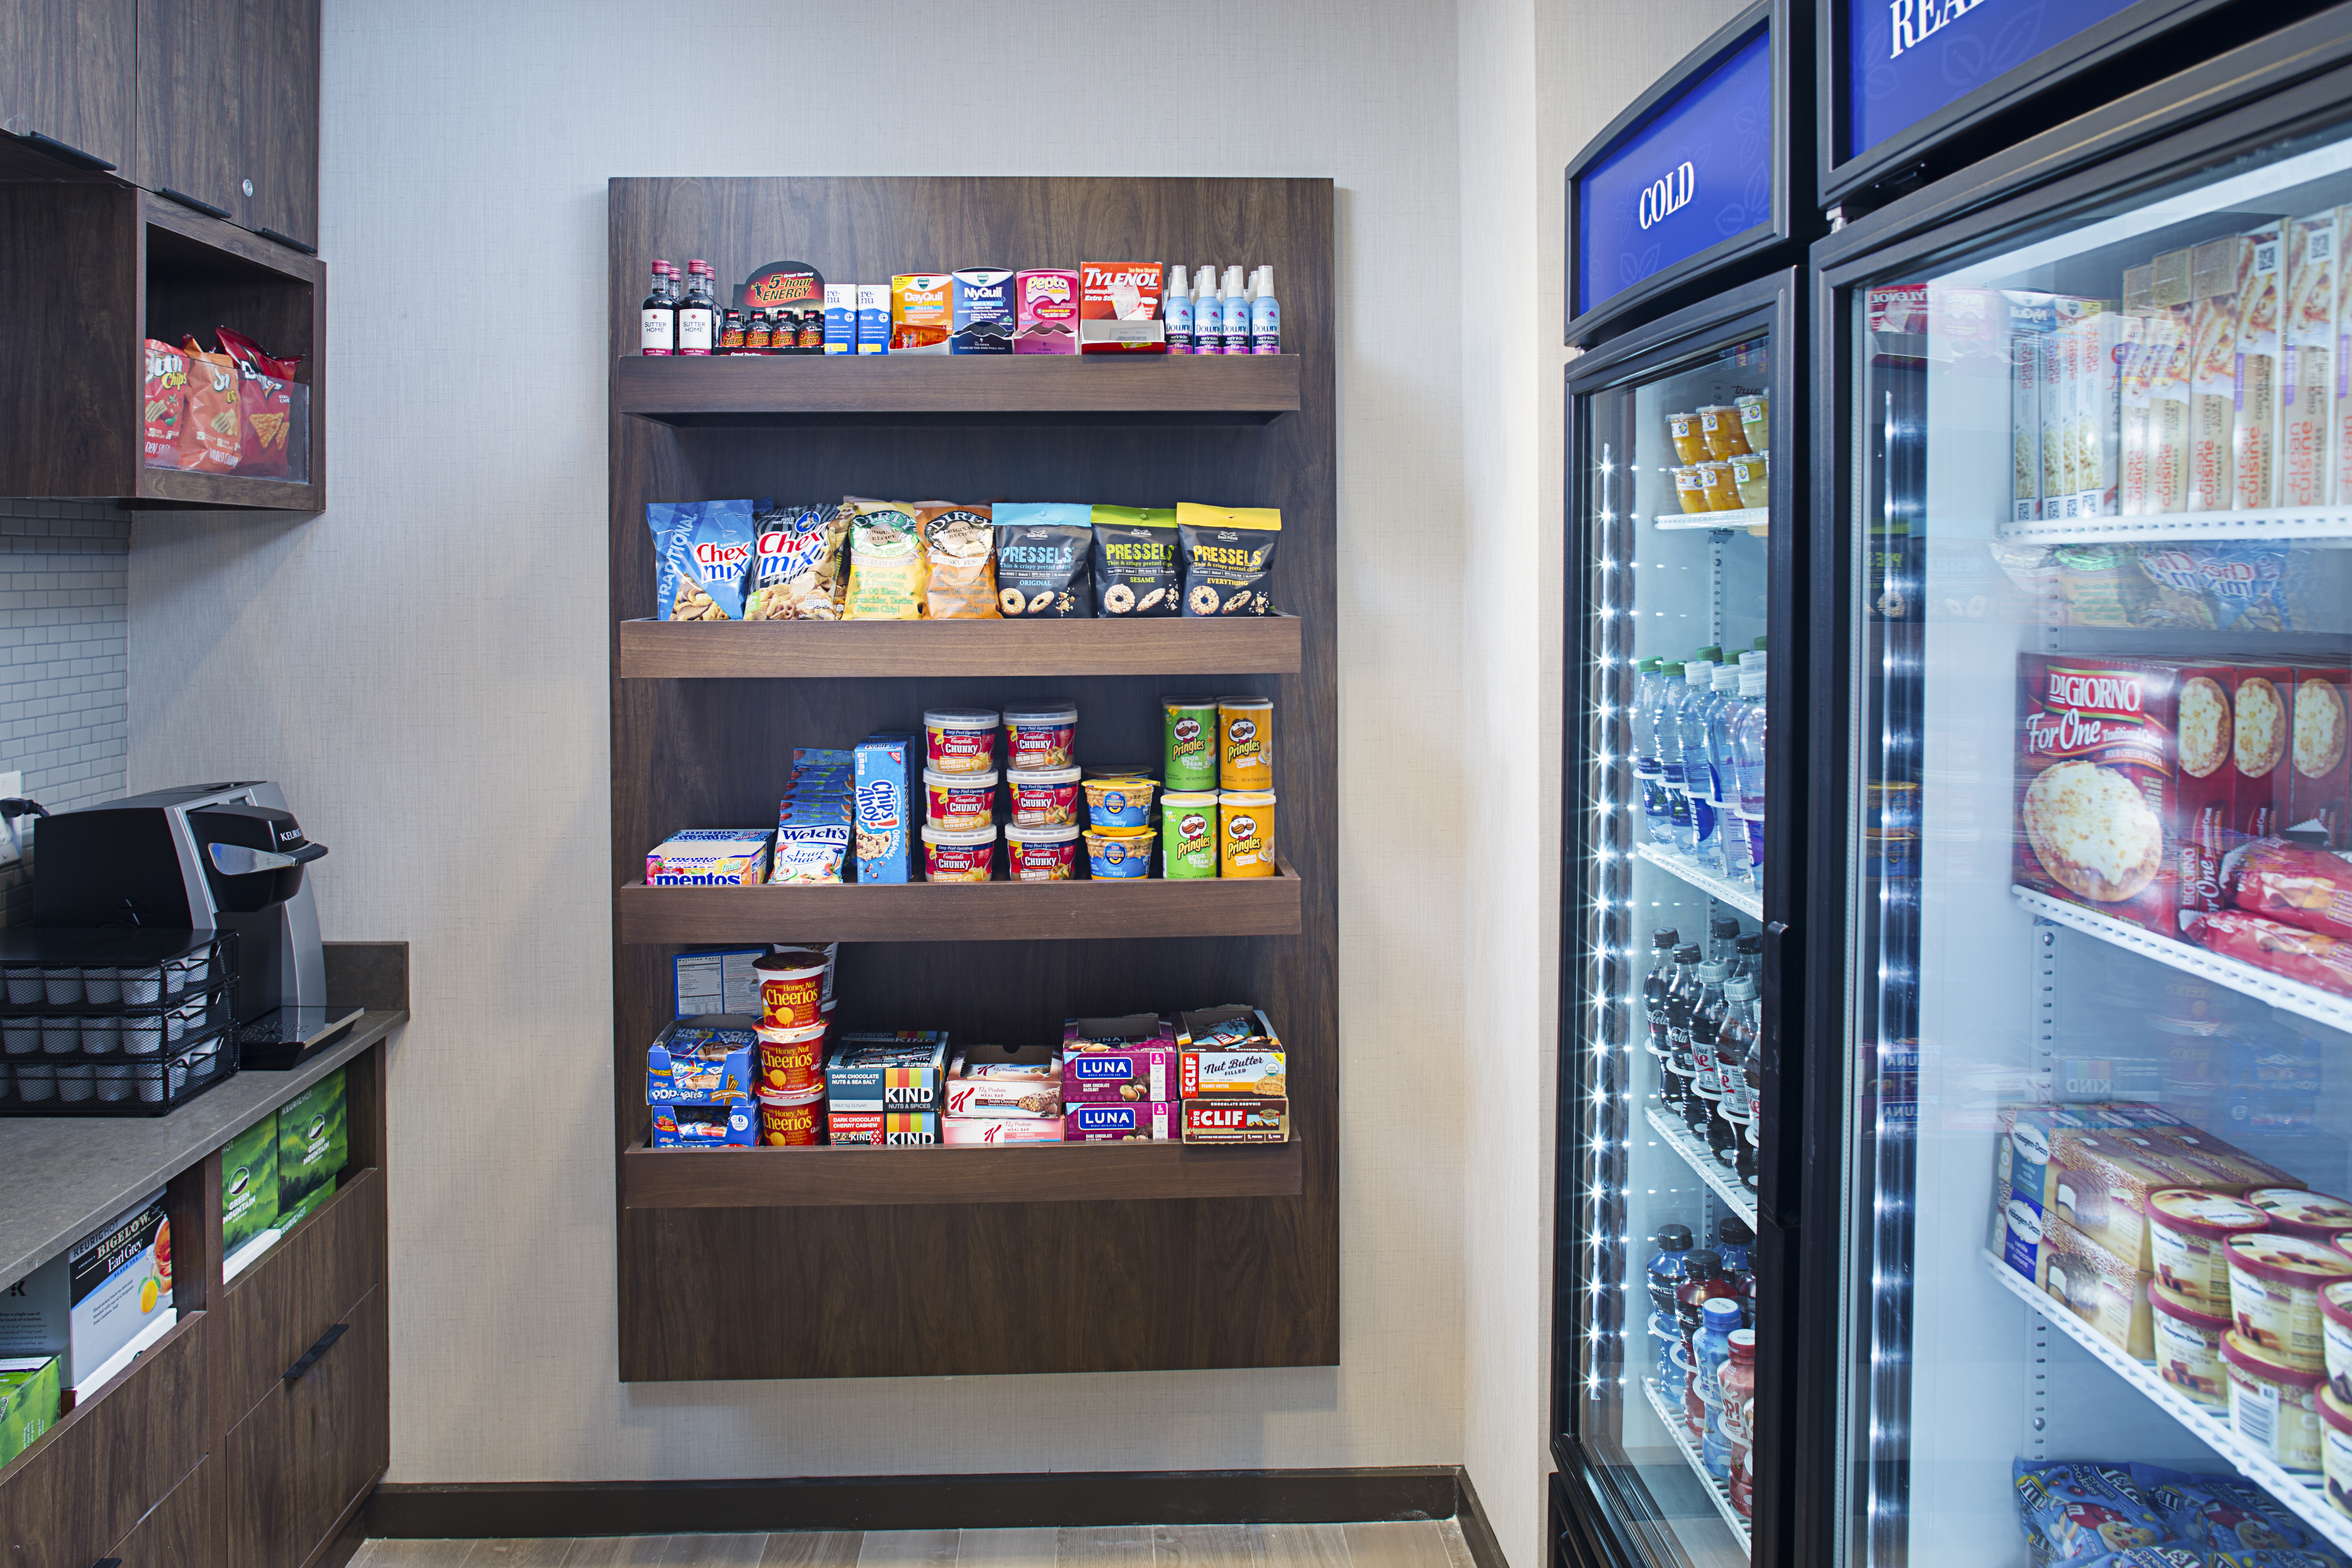 Coffee, Keurig, Snacks, Convenience Items, Frozen Dinners, and Cold Beverages Available For Guest Purchase at Pavilion Pantry